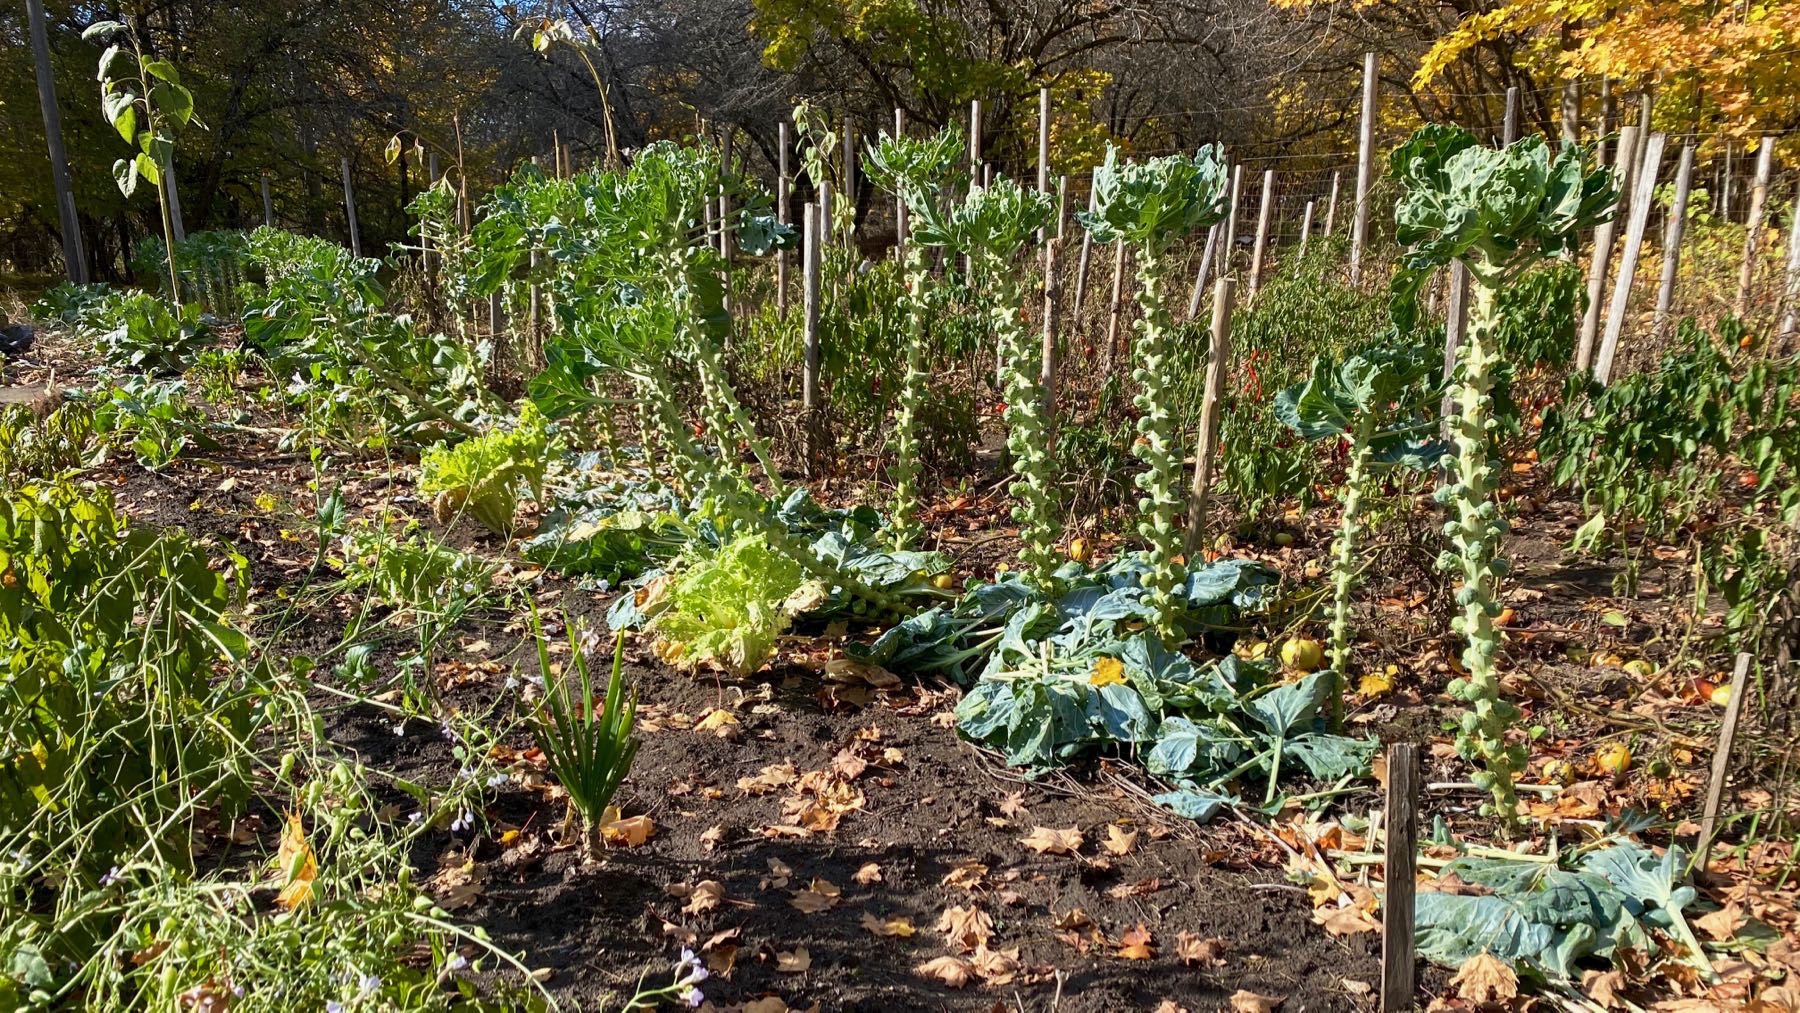 Brussels sprout trees